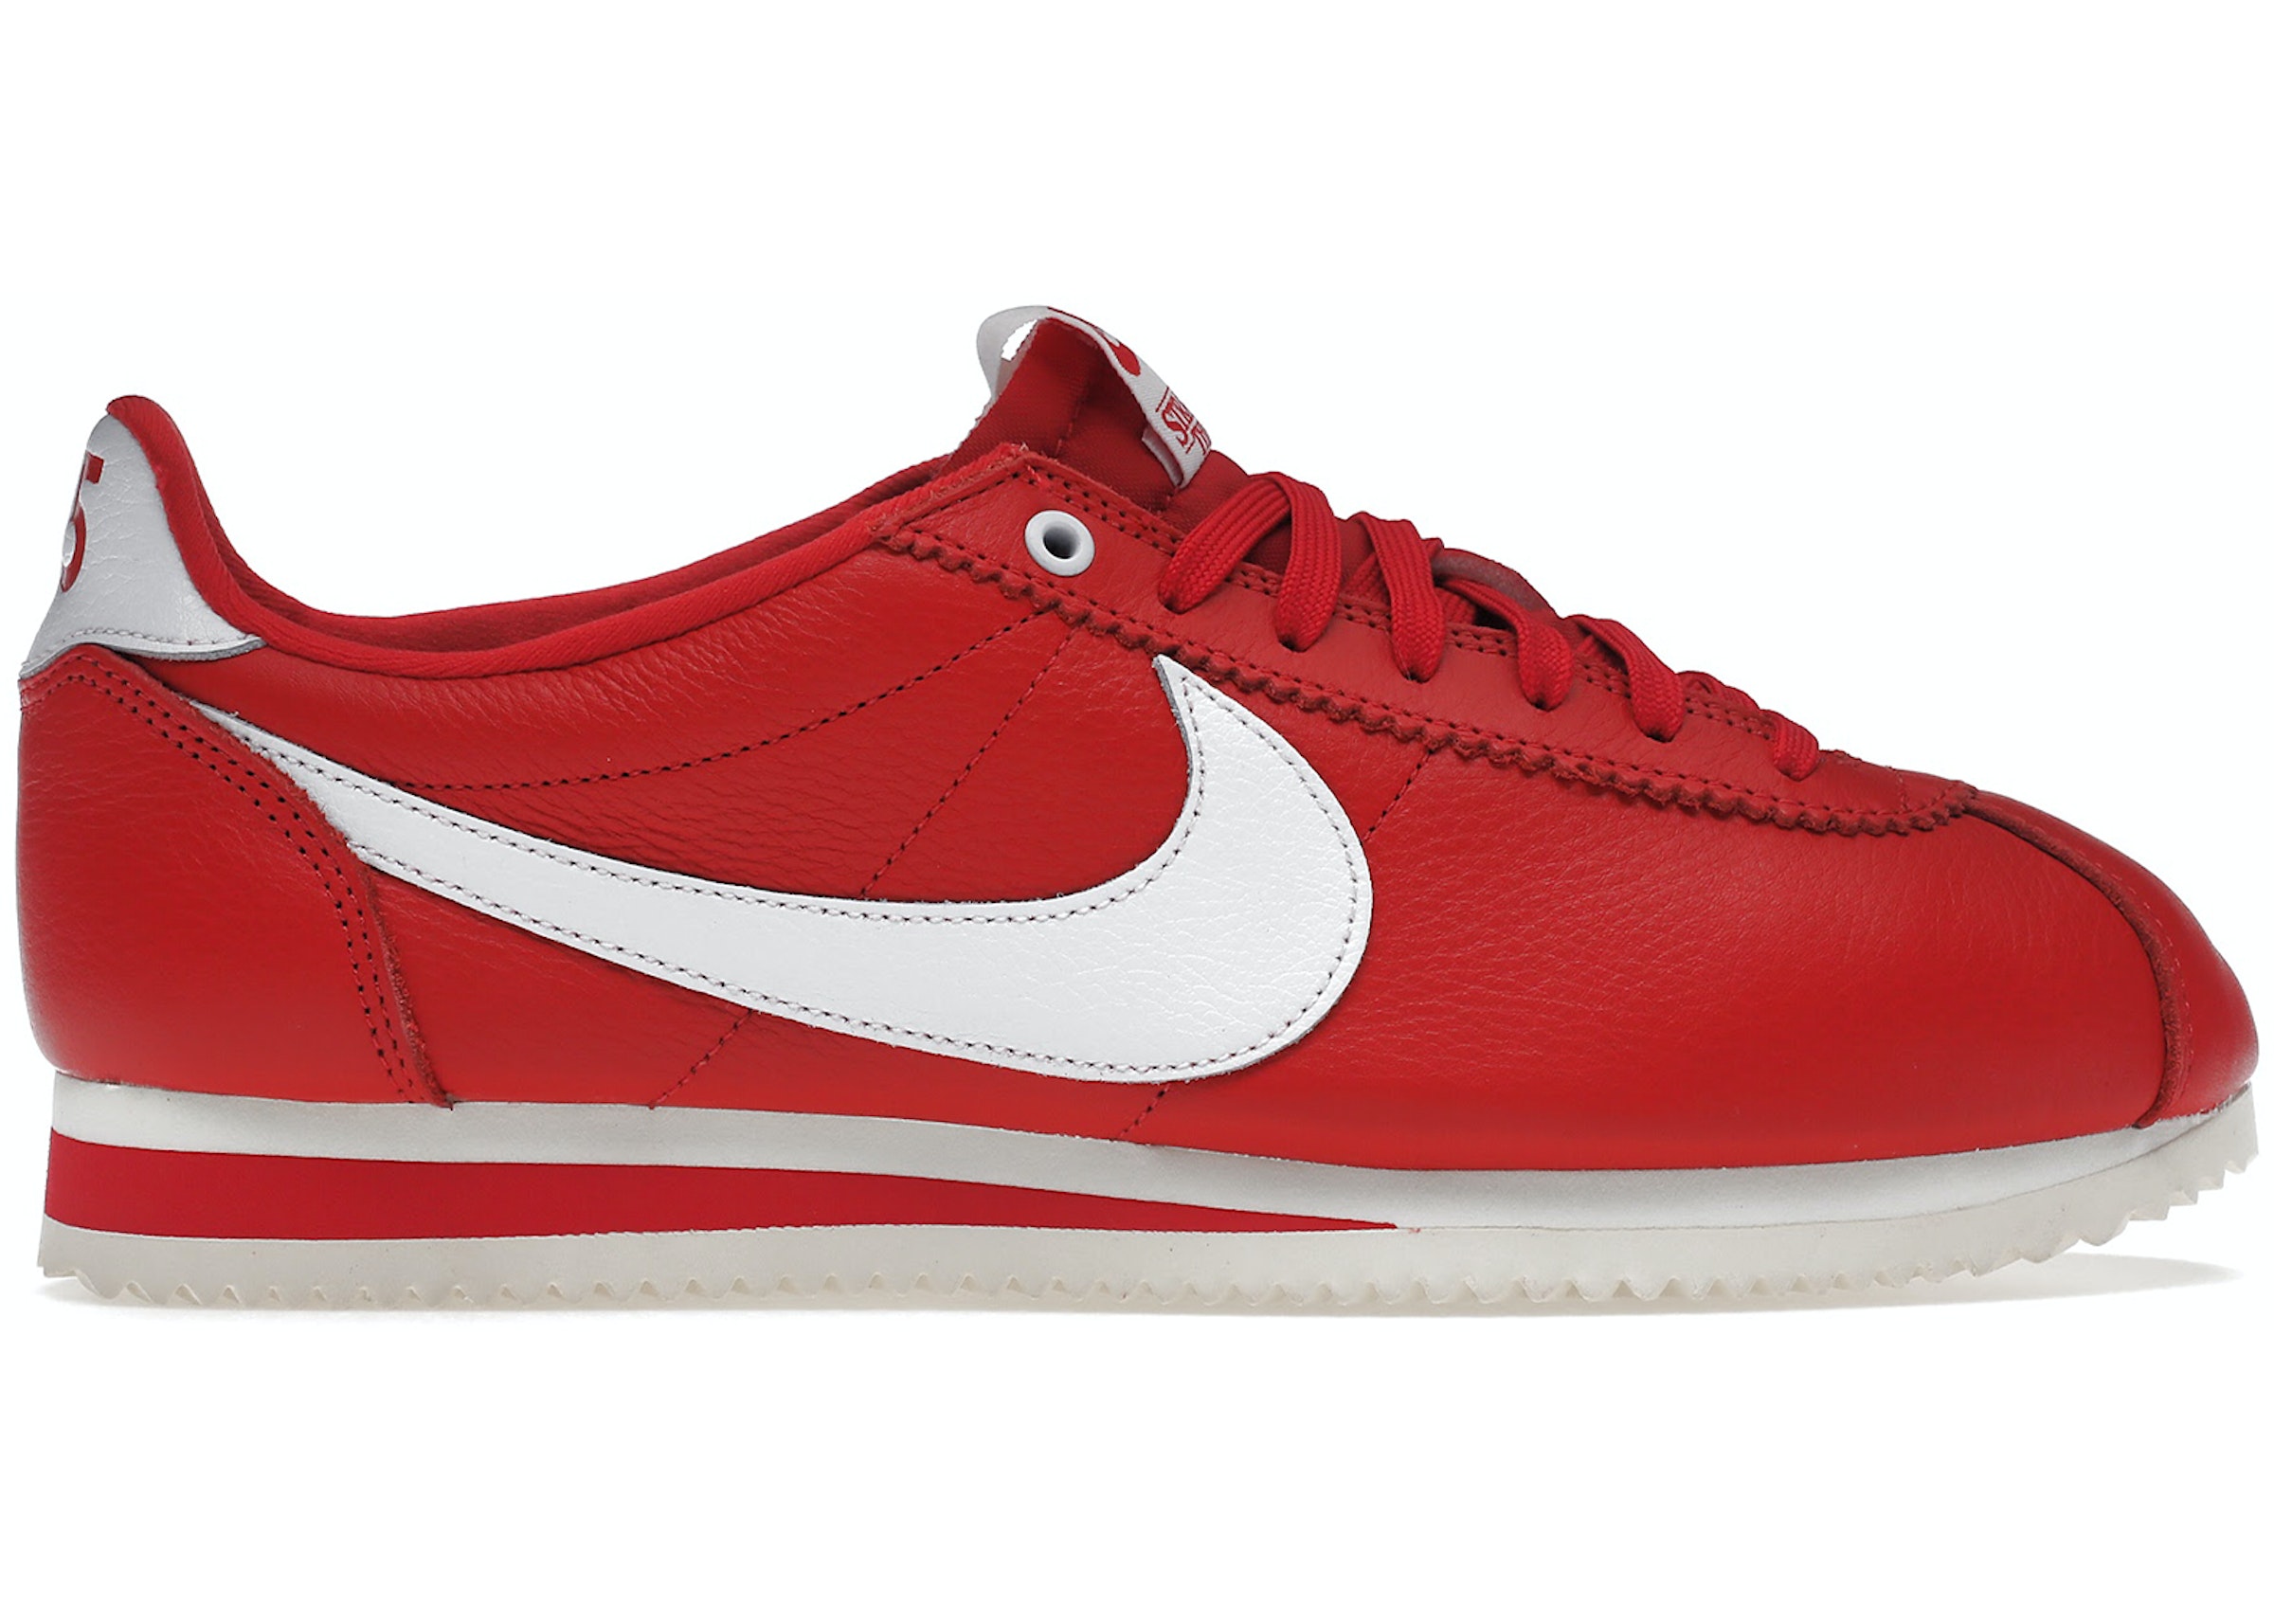 Descuido cirujano compañero Nike Classic Cortez Stranger Things Independence Day Pack Men's -  CK1907-600 - US